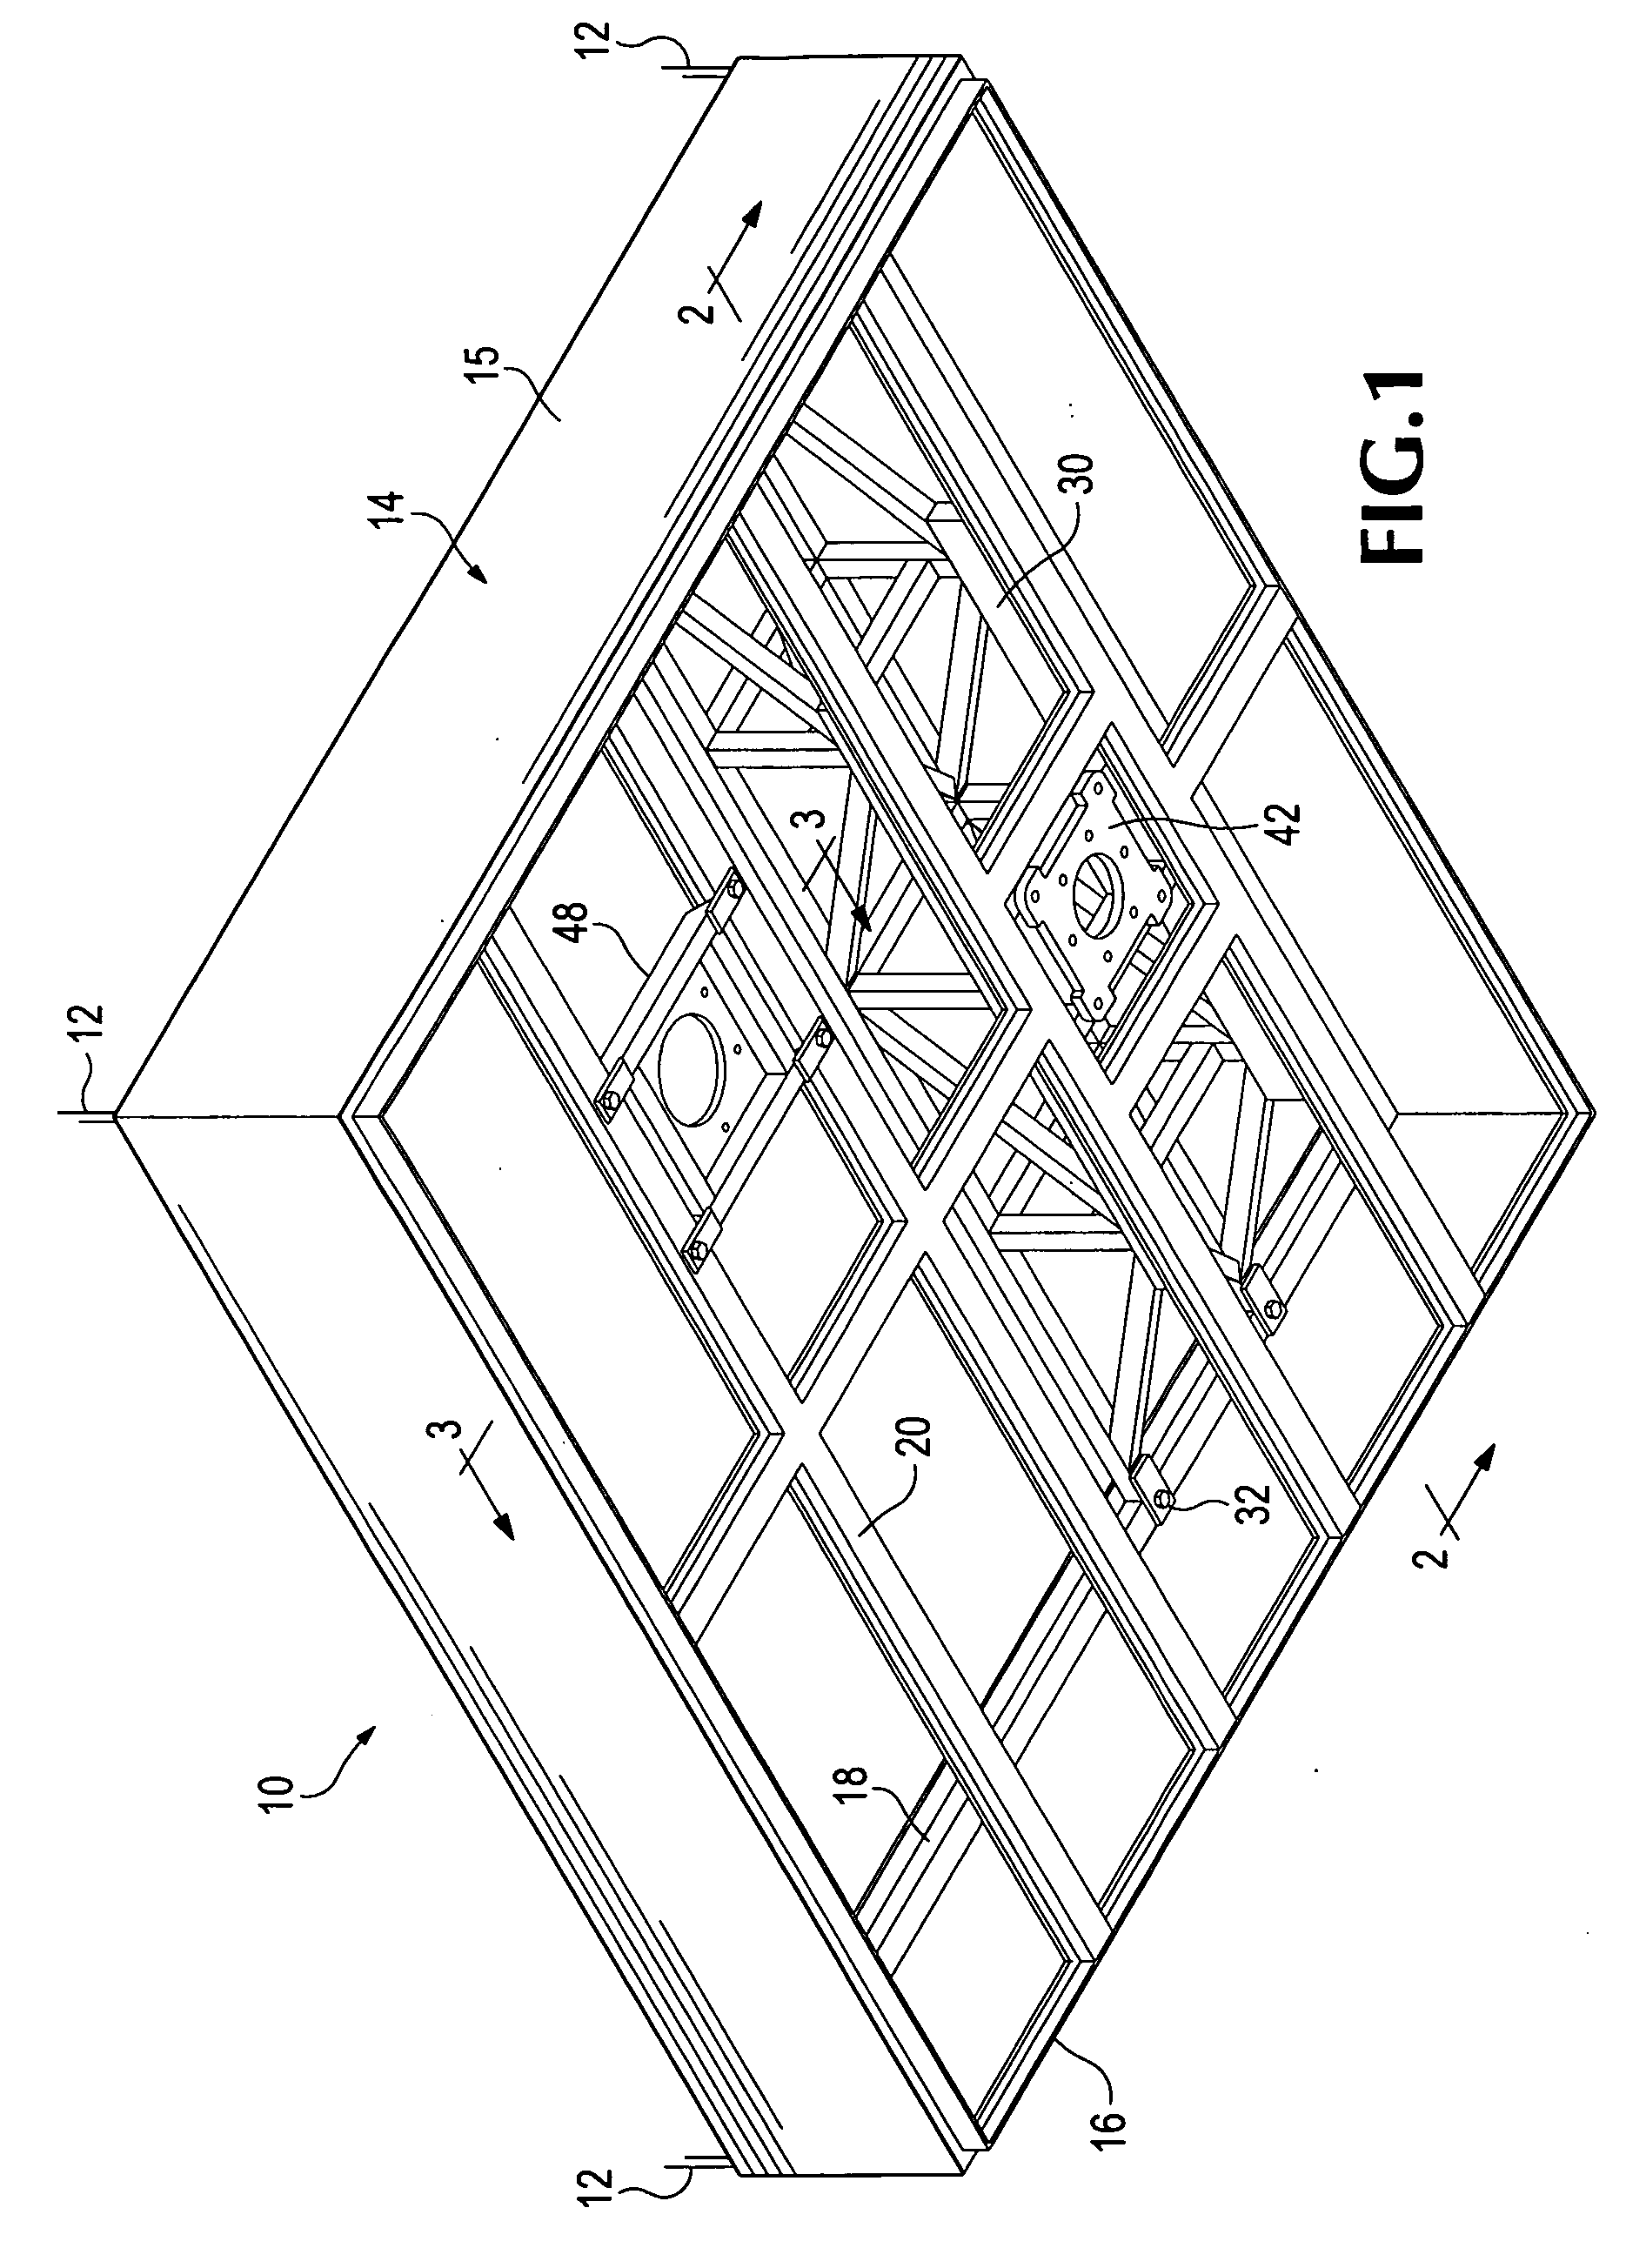 Ceiling system with integrated equipment support structure